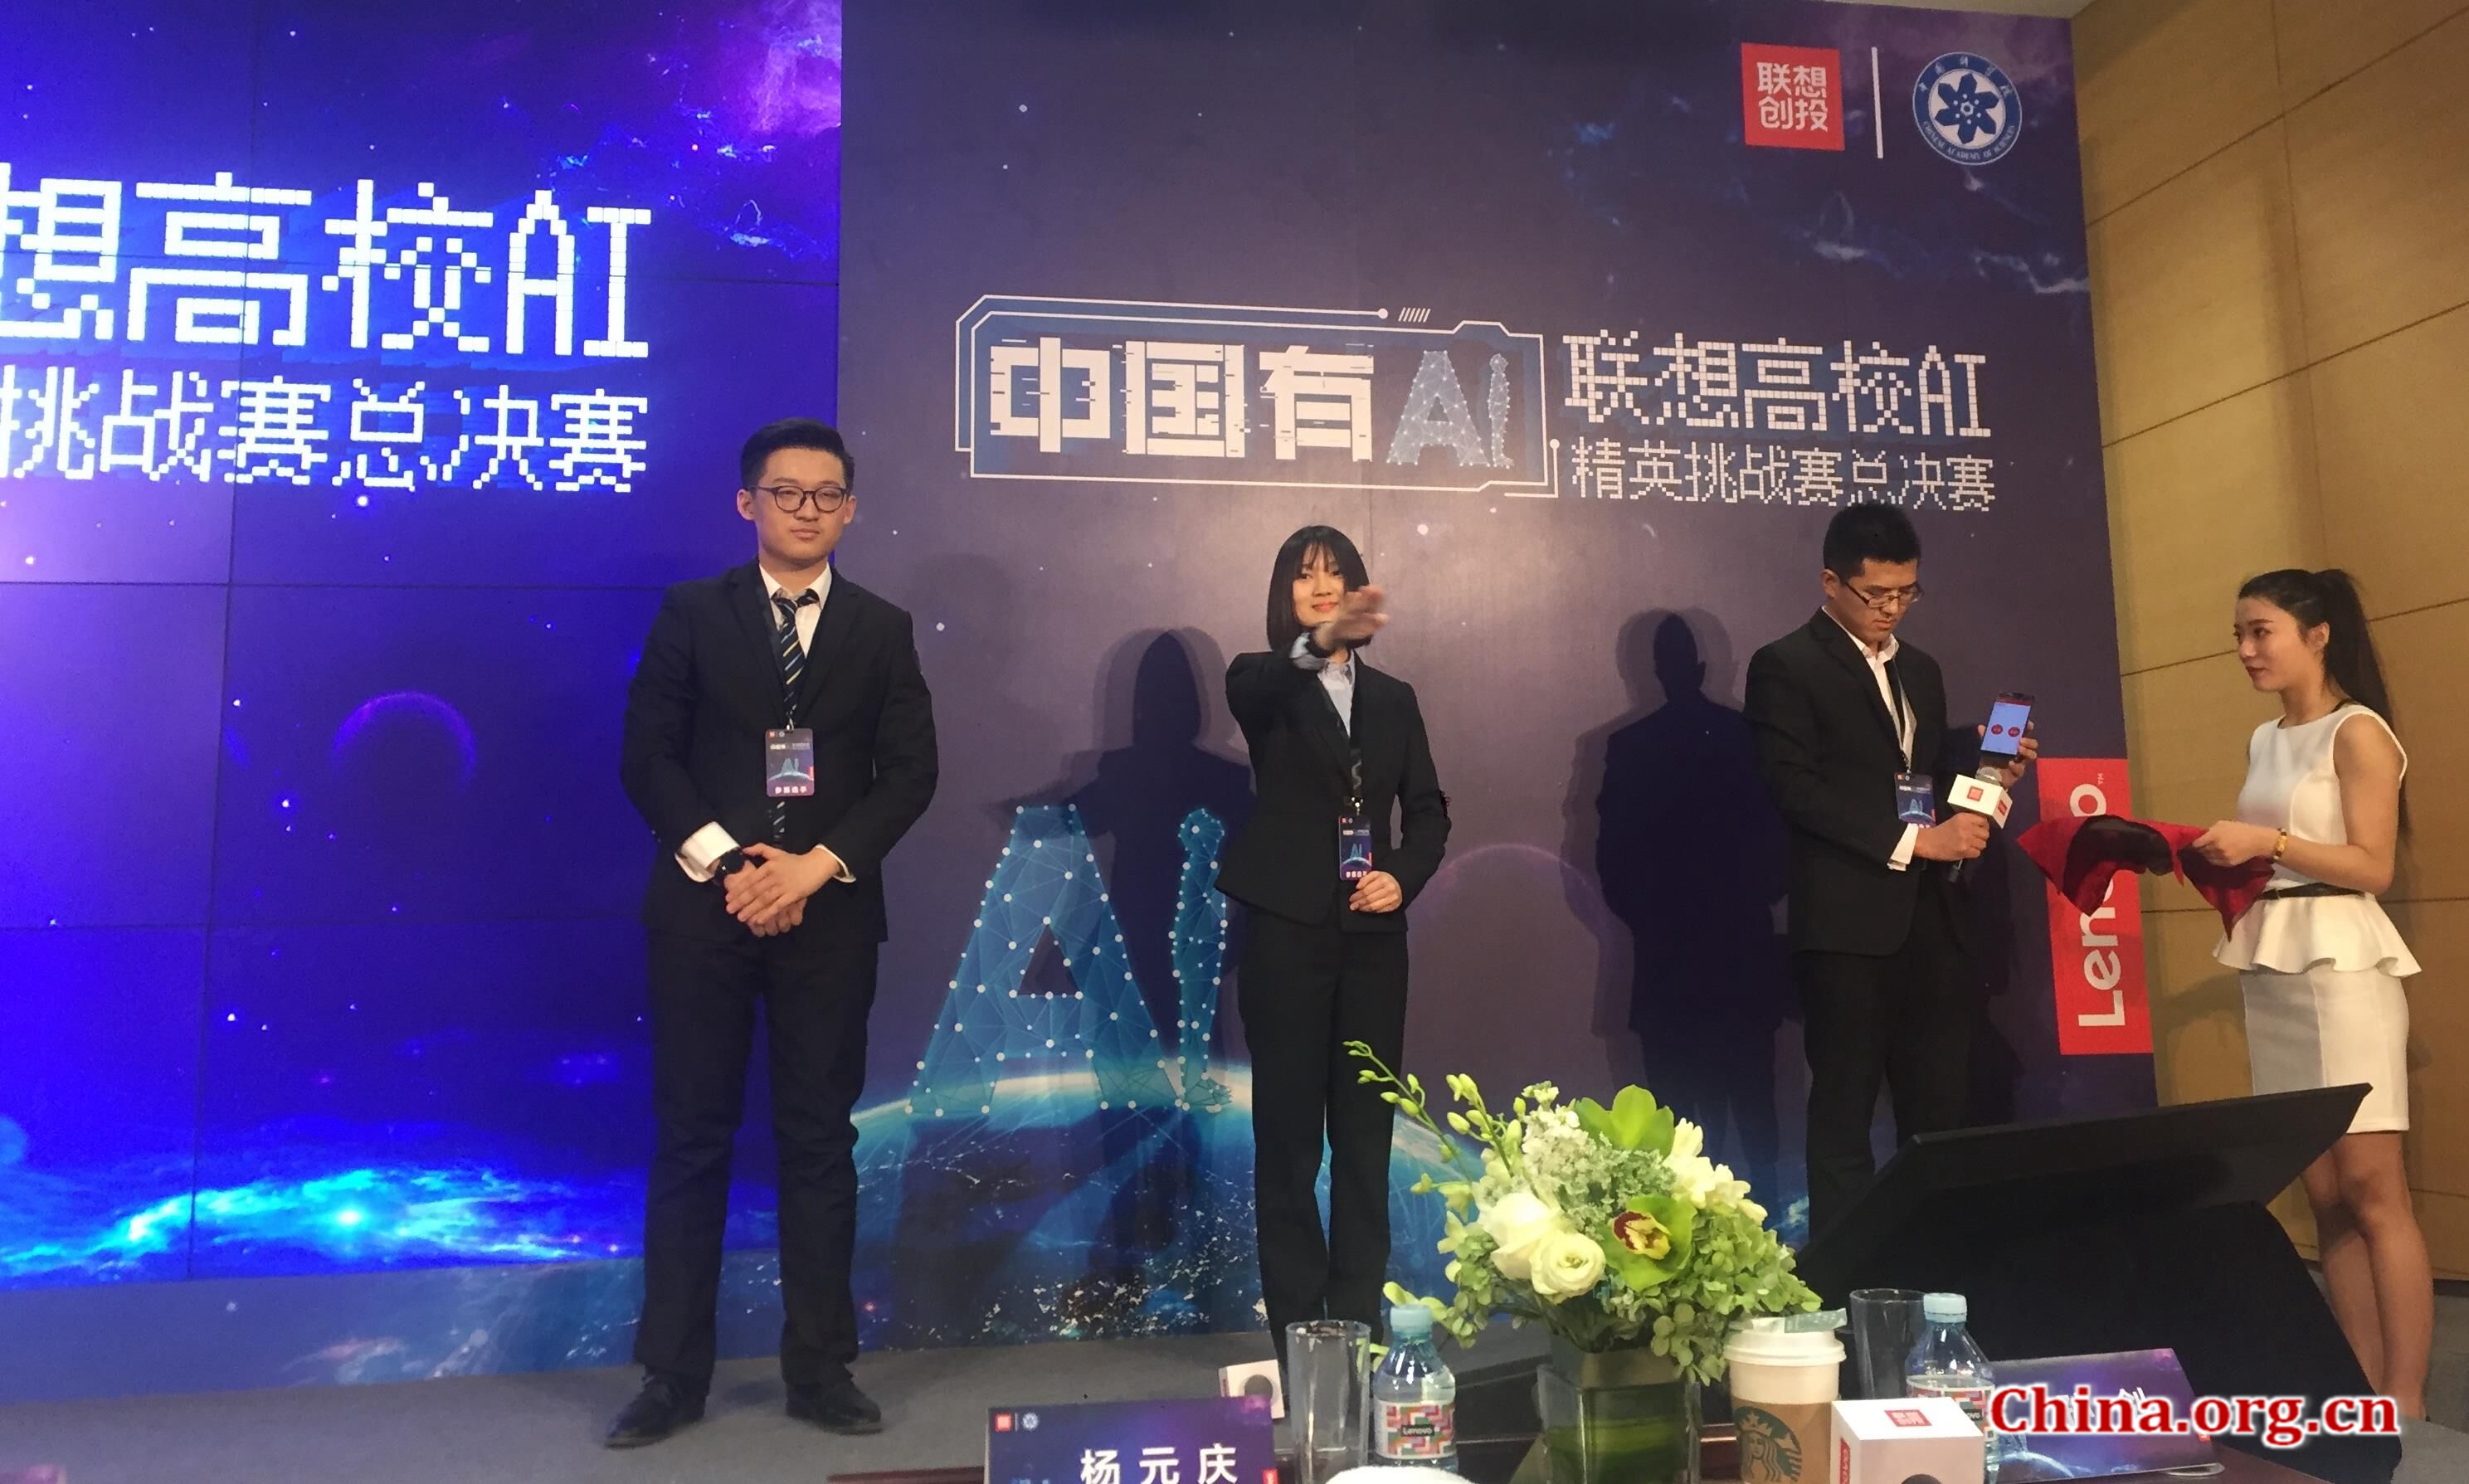 A startup team from University of Science and Technology demonstrates their sign language translator during an AI competition in Beijing on Mar. 29, 2018. [Photo by Guo Yiming/China.org.cn]